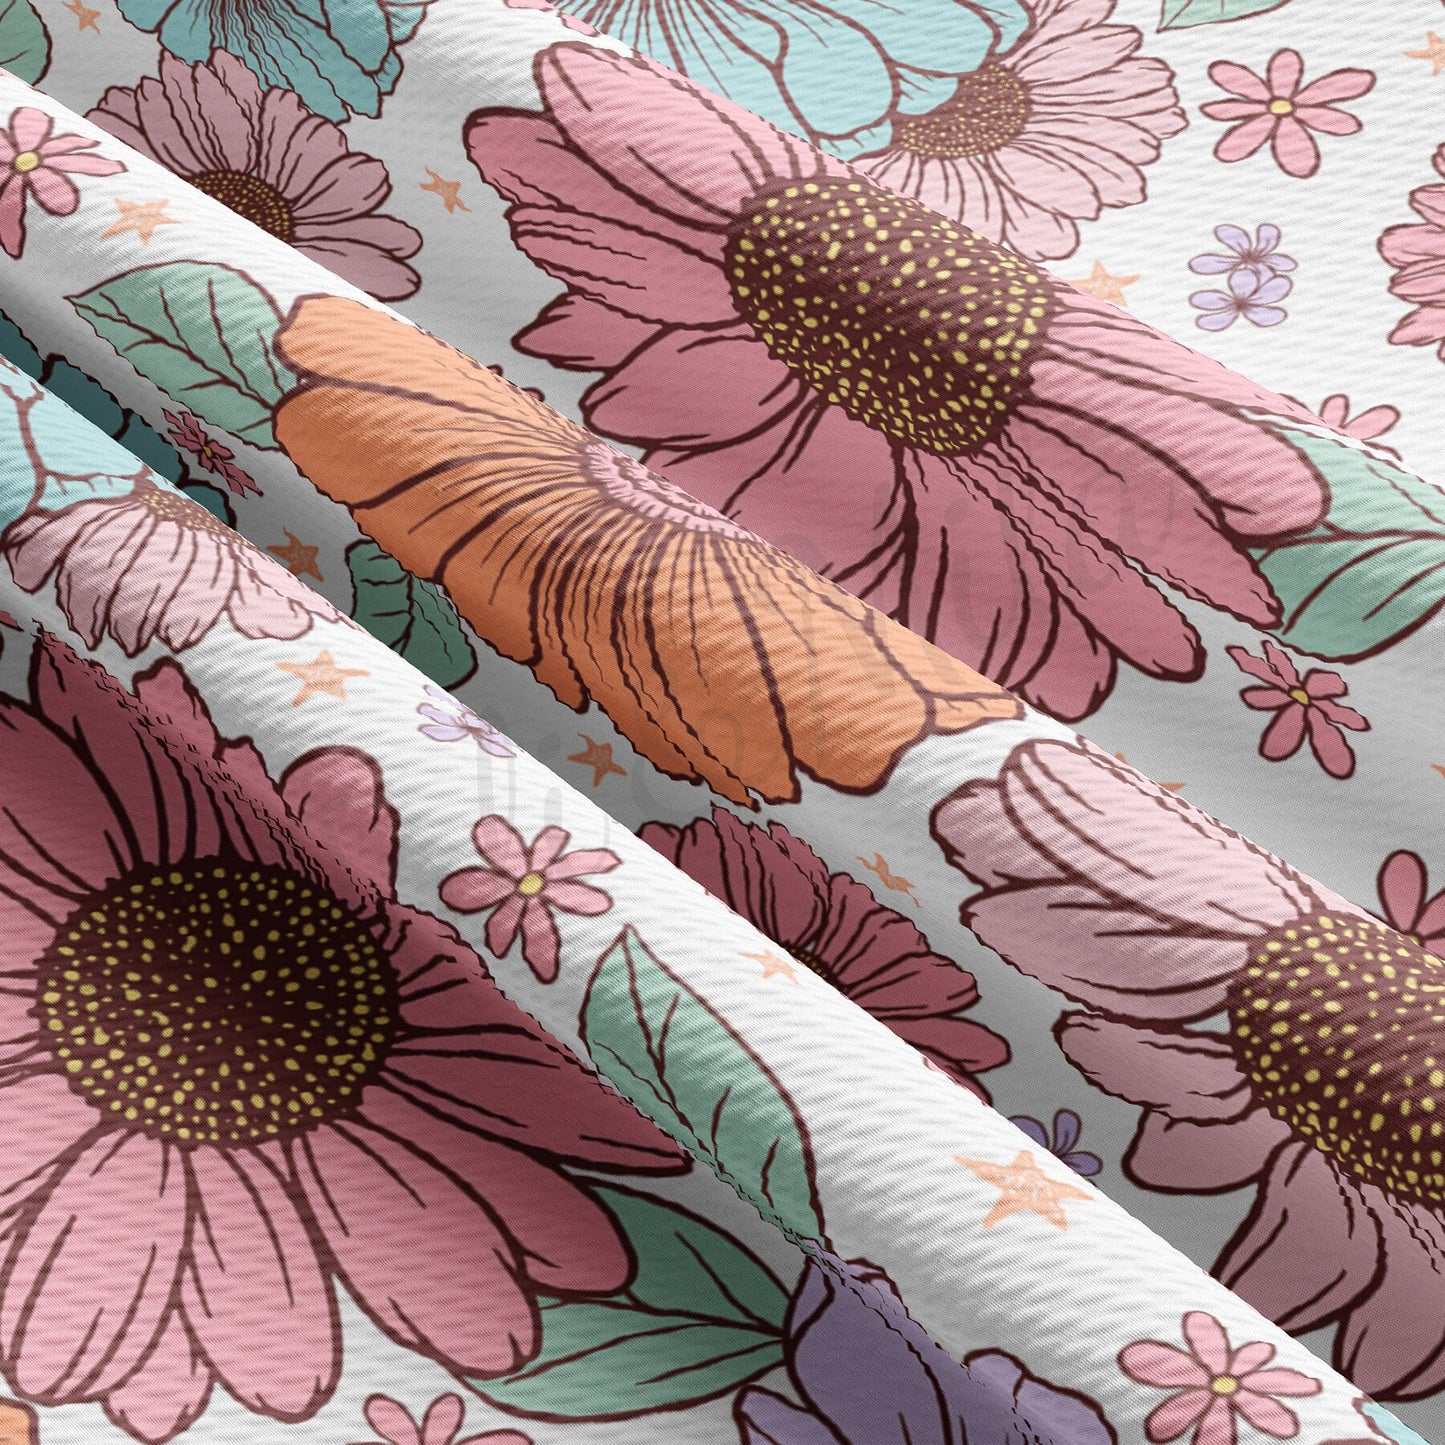 Floral  Bullet Textured Fabric by the yard AA1581